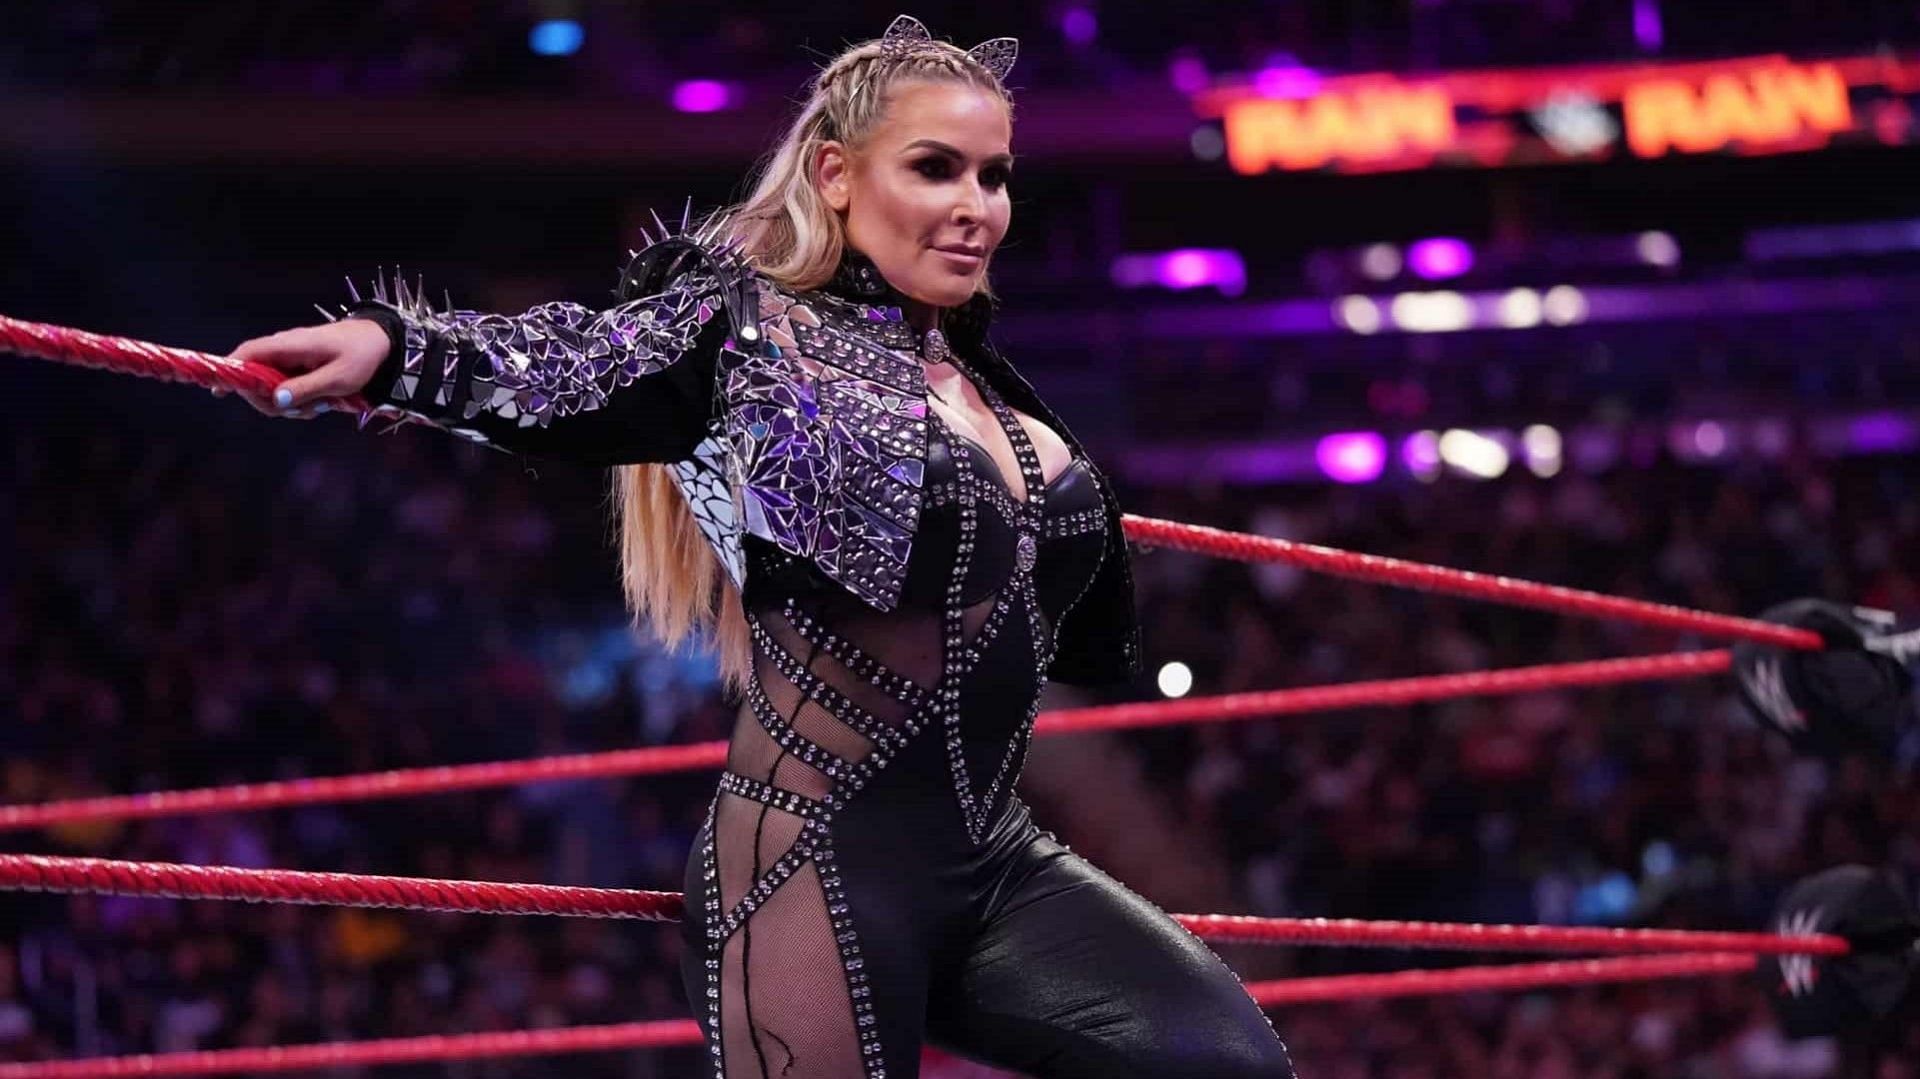 Natalya poses on the ropes during WWE RAW